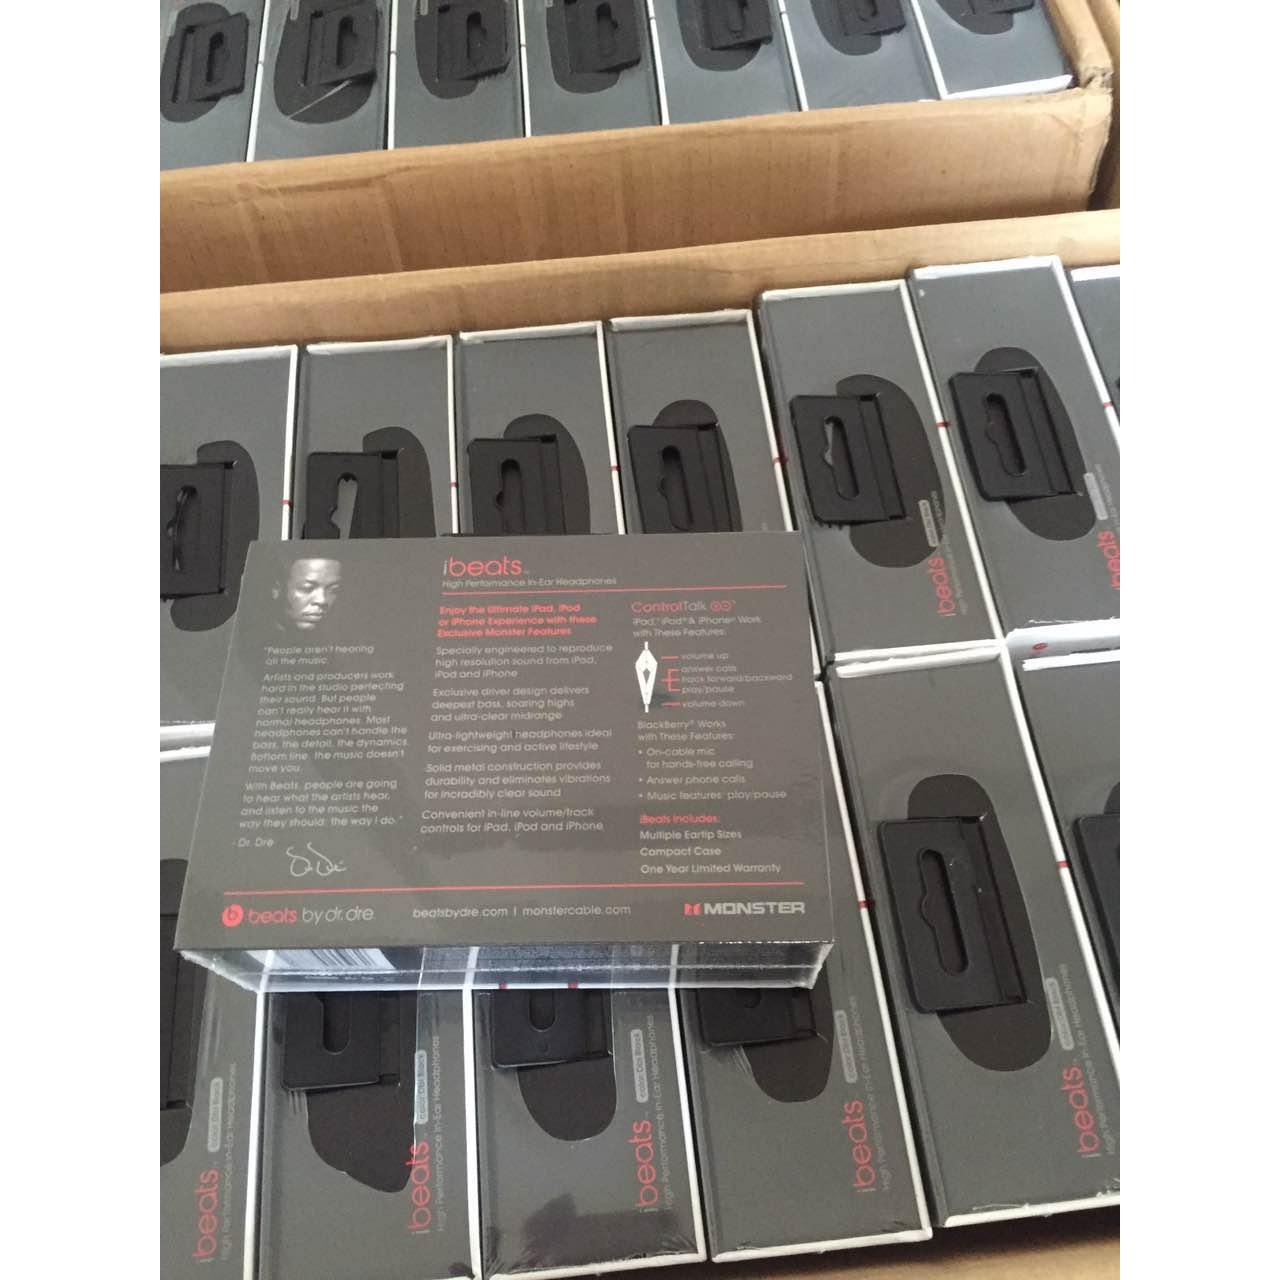 Apple Monster headset ibeats(Offer ) Wholesale Suppliers